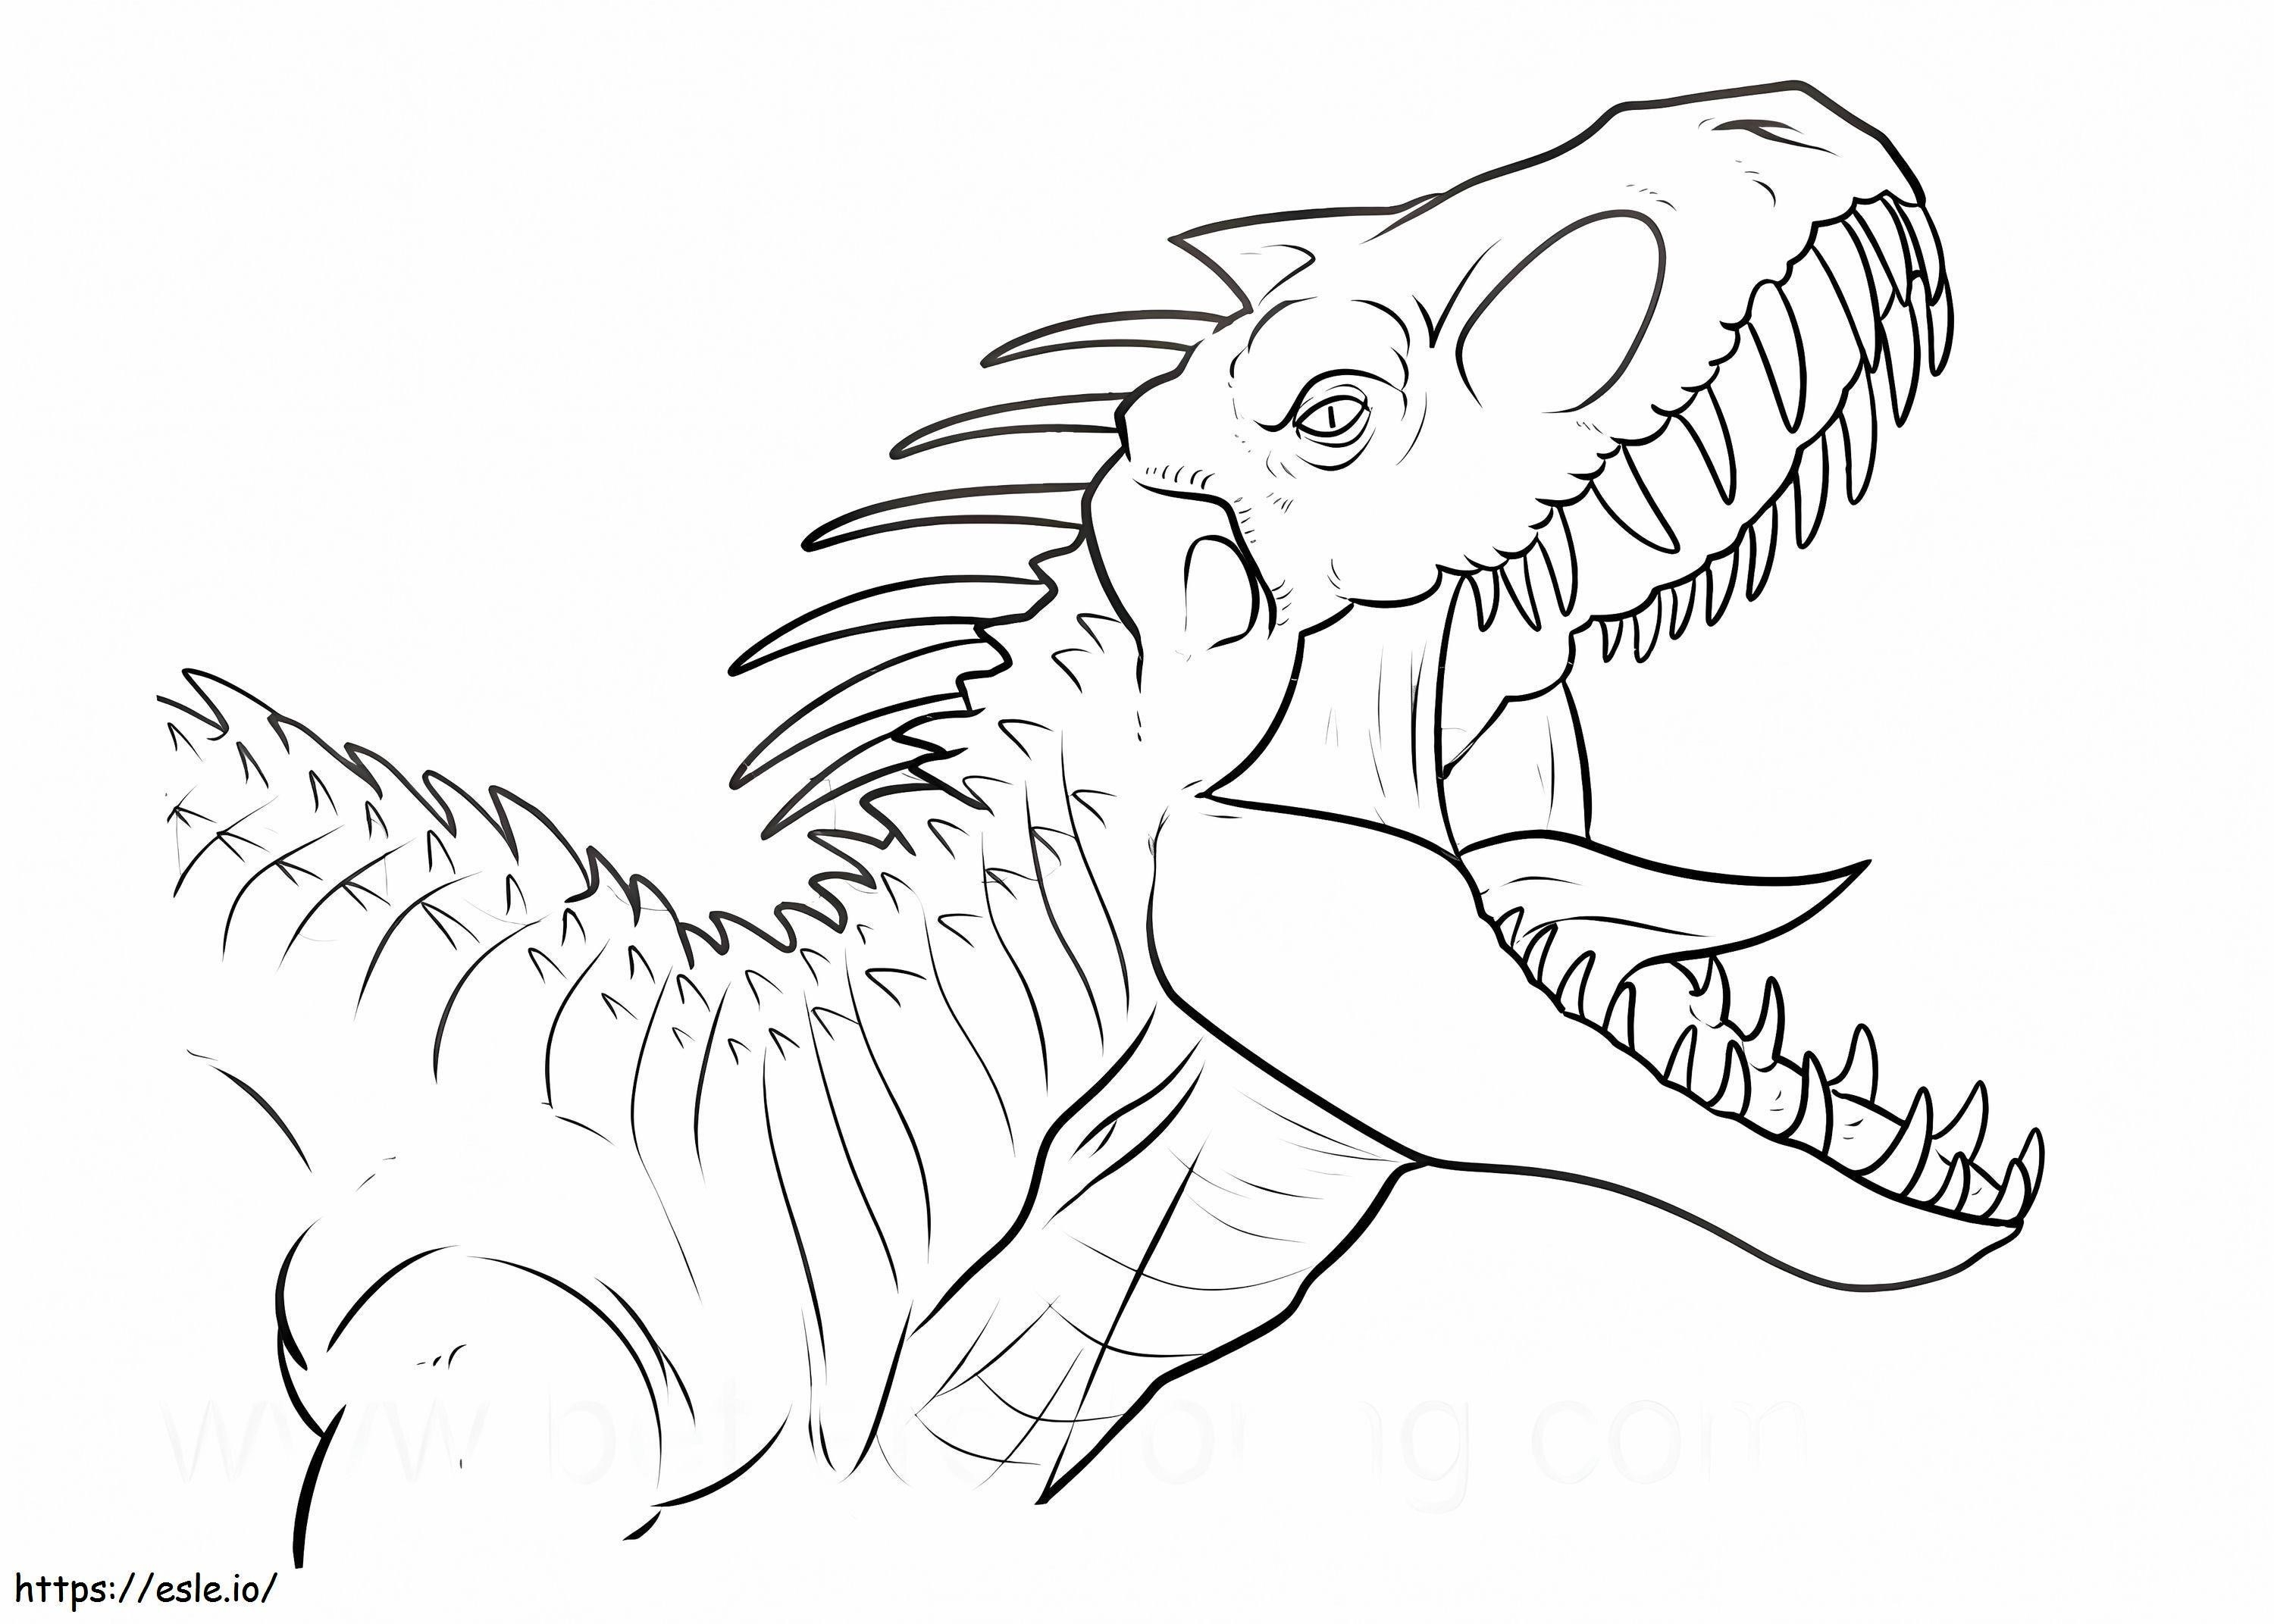 1541206364 Indoraptor From Jurassic World coloring page